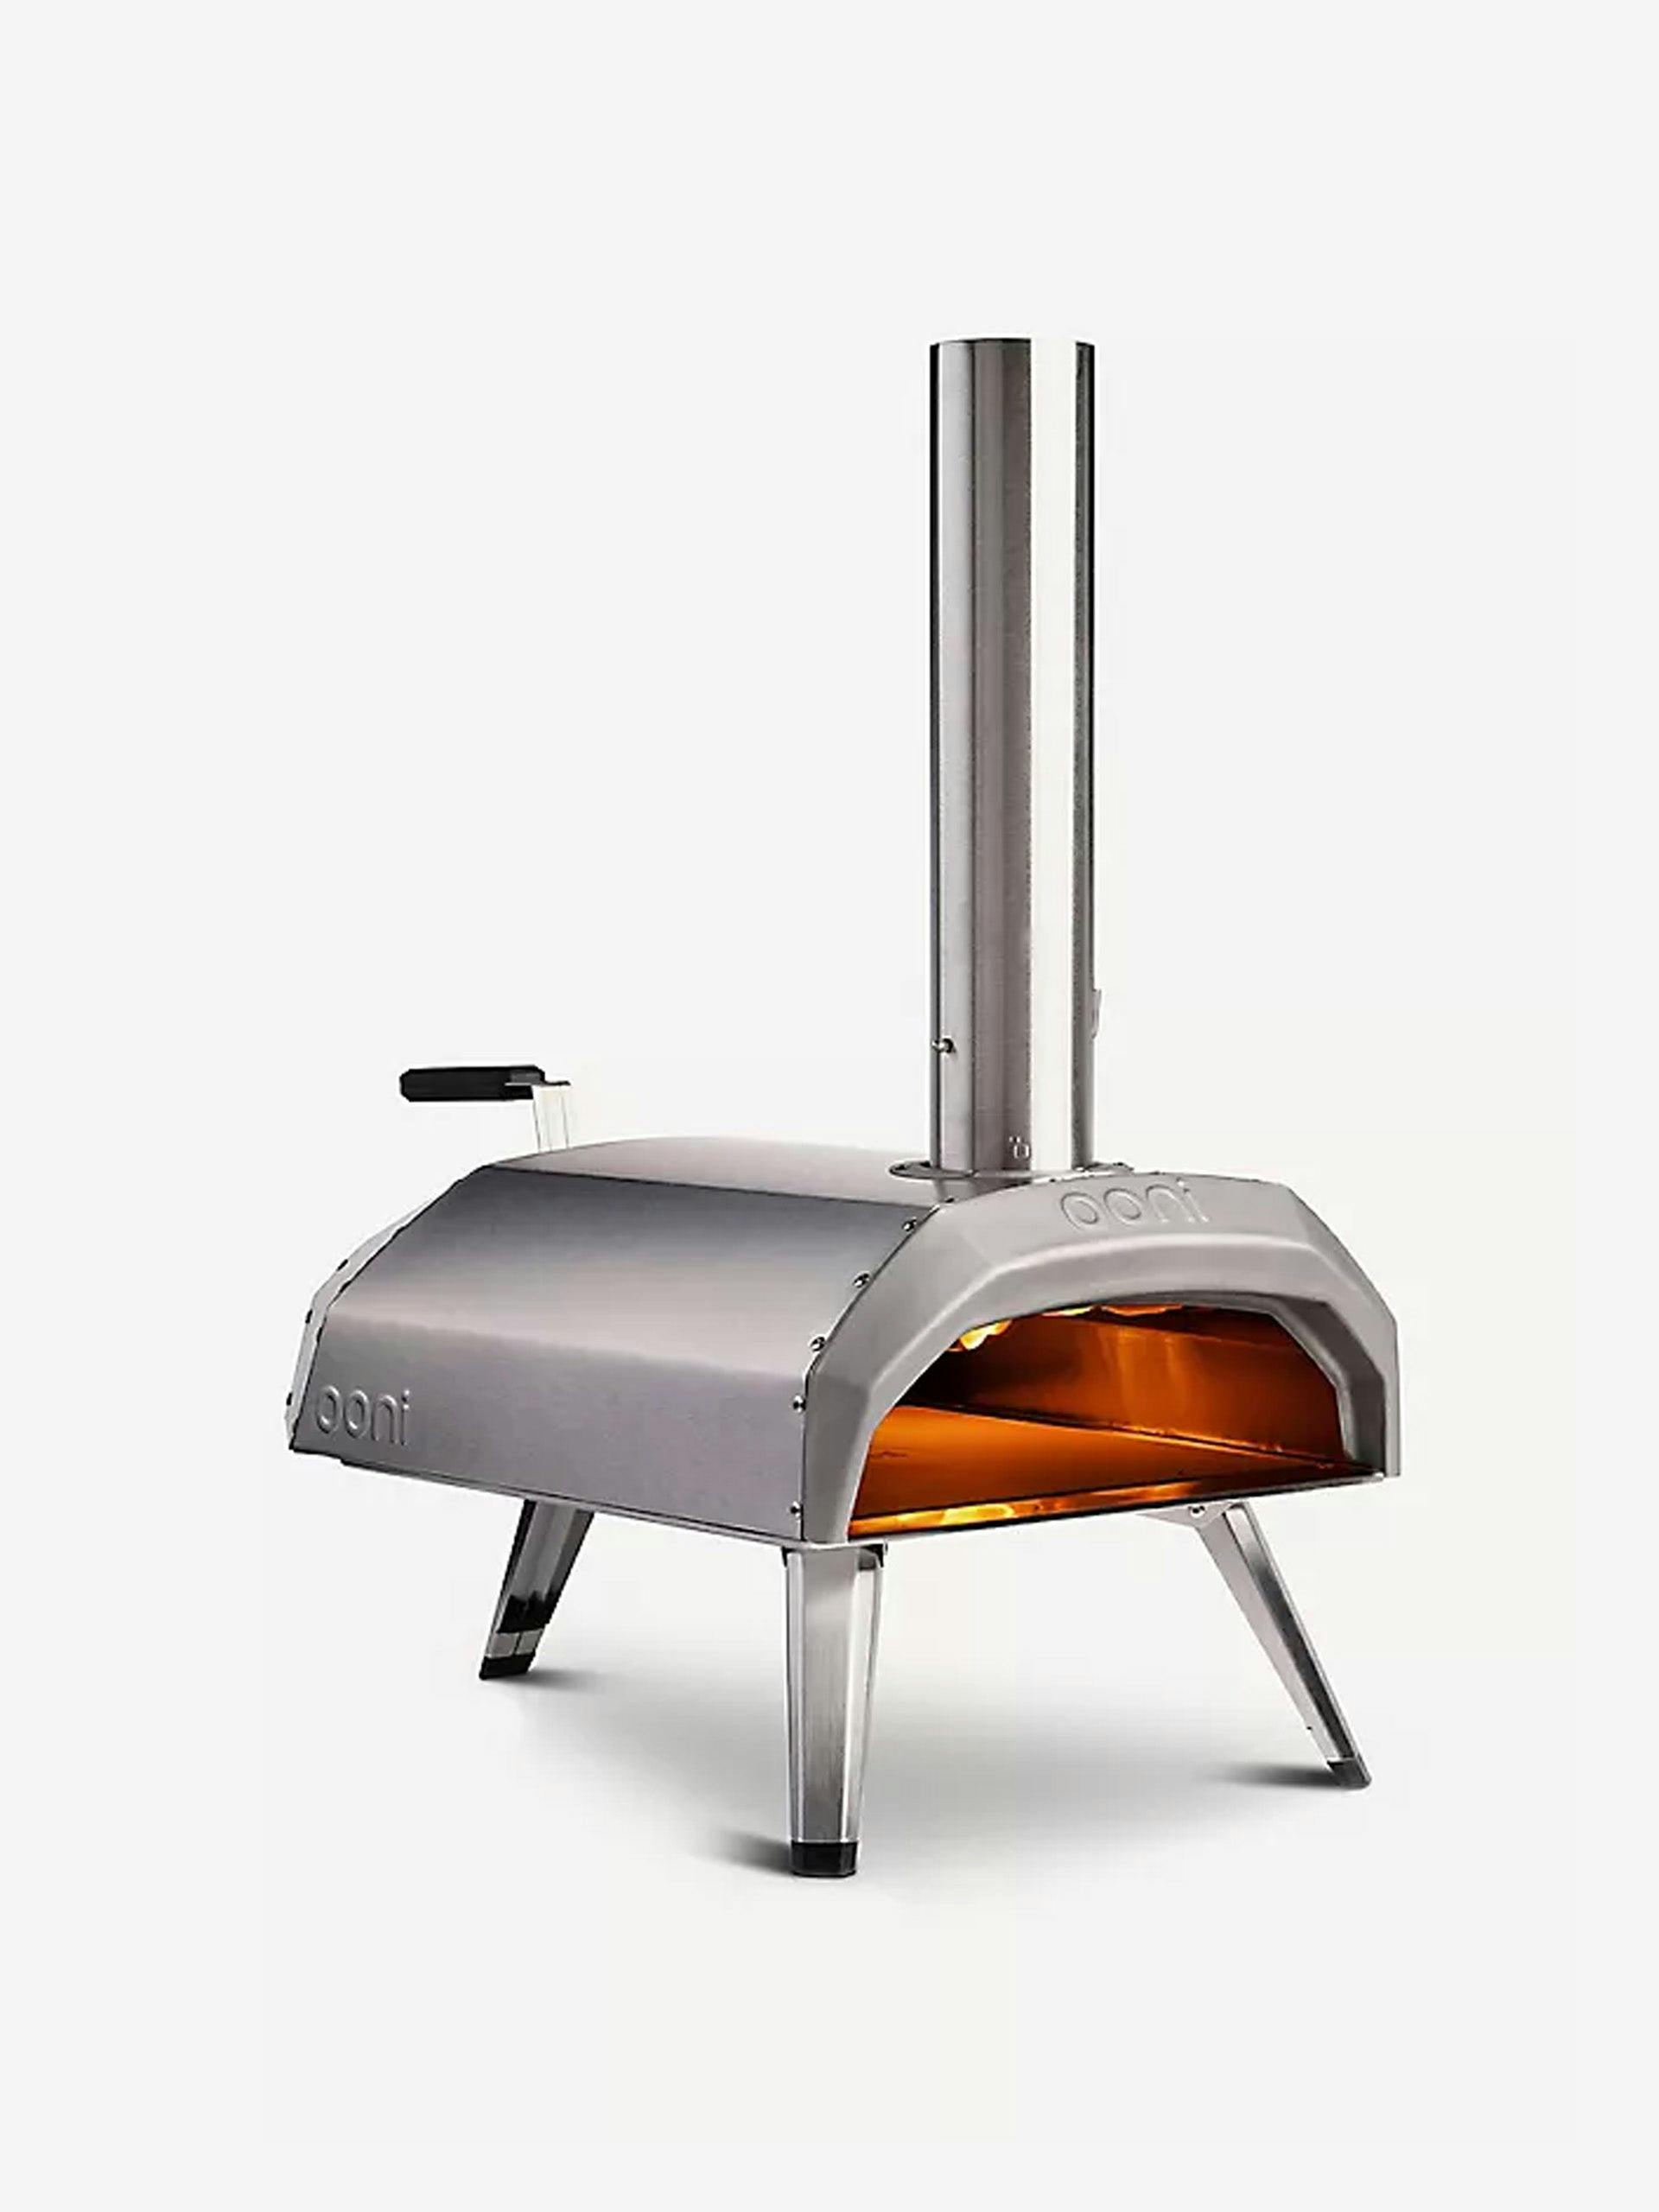 Karu wood and charcoal-fired portable pizza oven